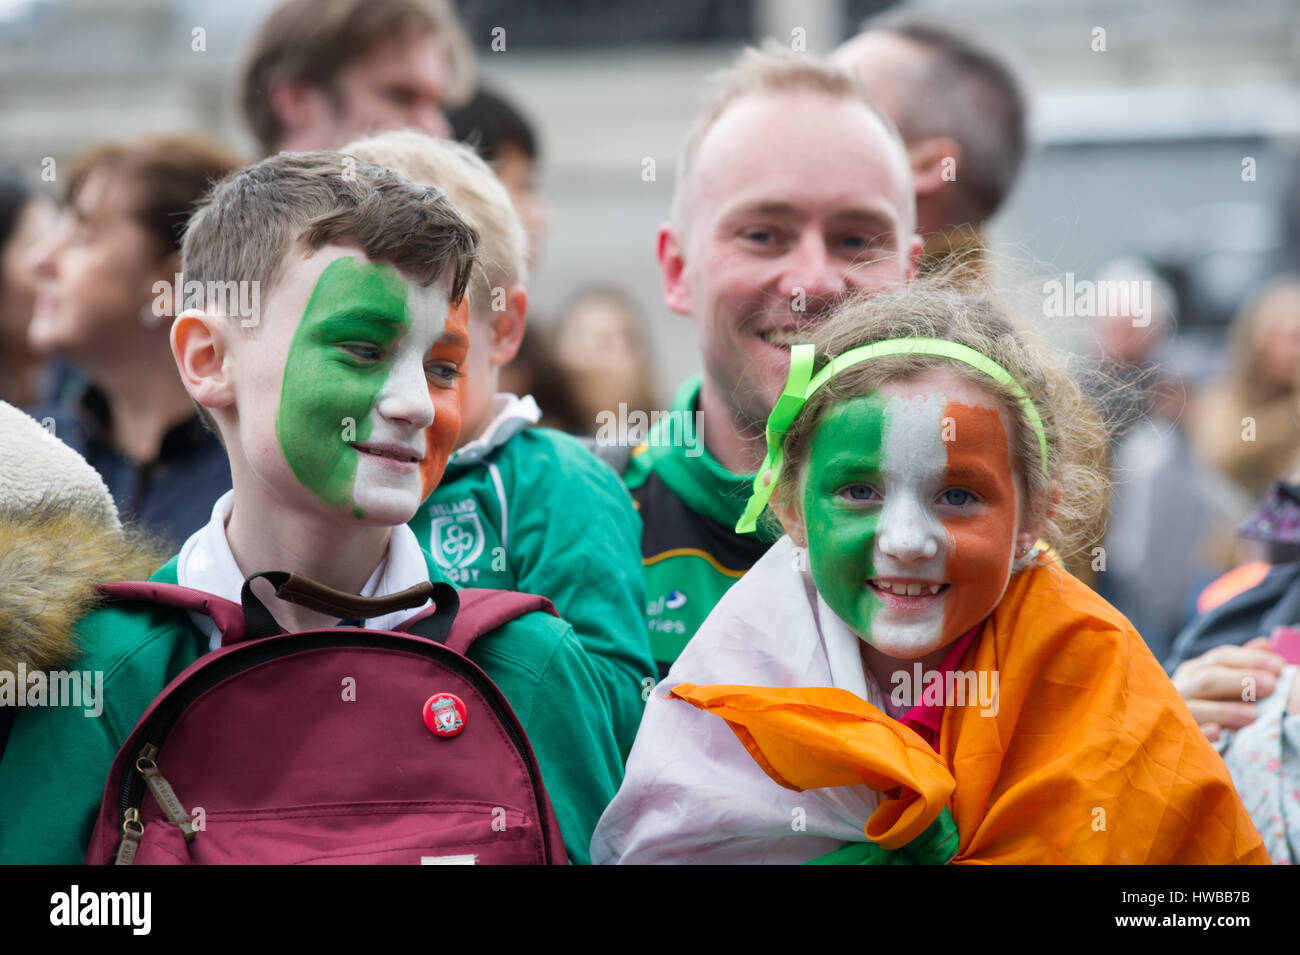 London, England, UK.  19th March 2017. The annual St Patrick's day parade through Central London and through Trafalgar Square, is the end of an official three-day celebration. The parade included various floats and acts along the way. Andrew Steven Graham/Alamy Live News Stock Photo